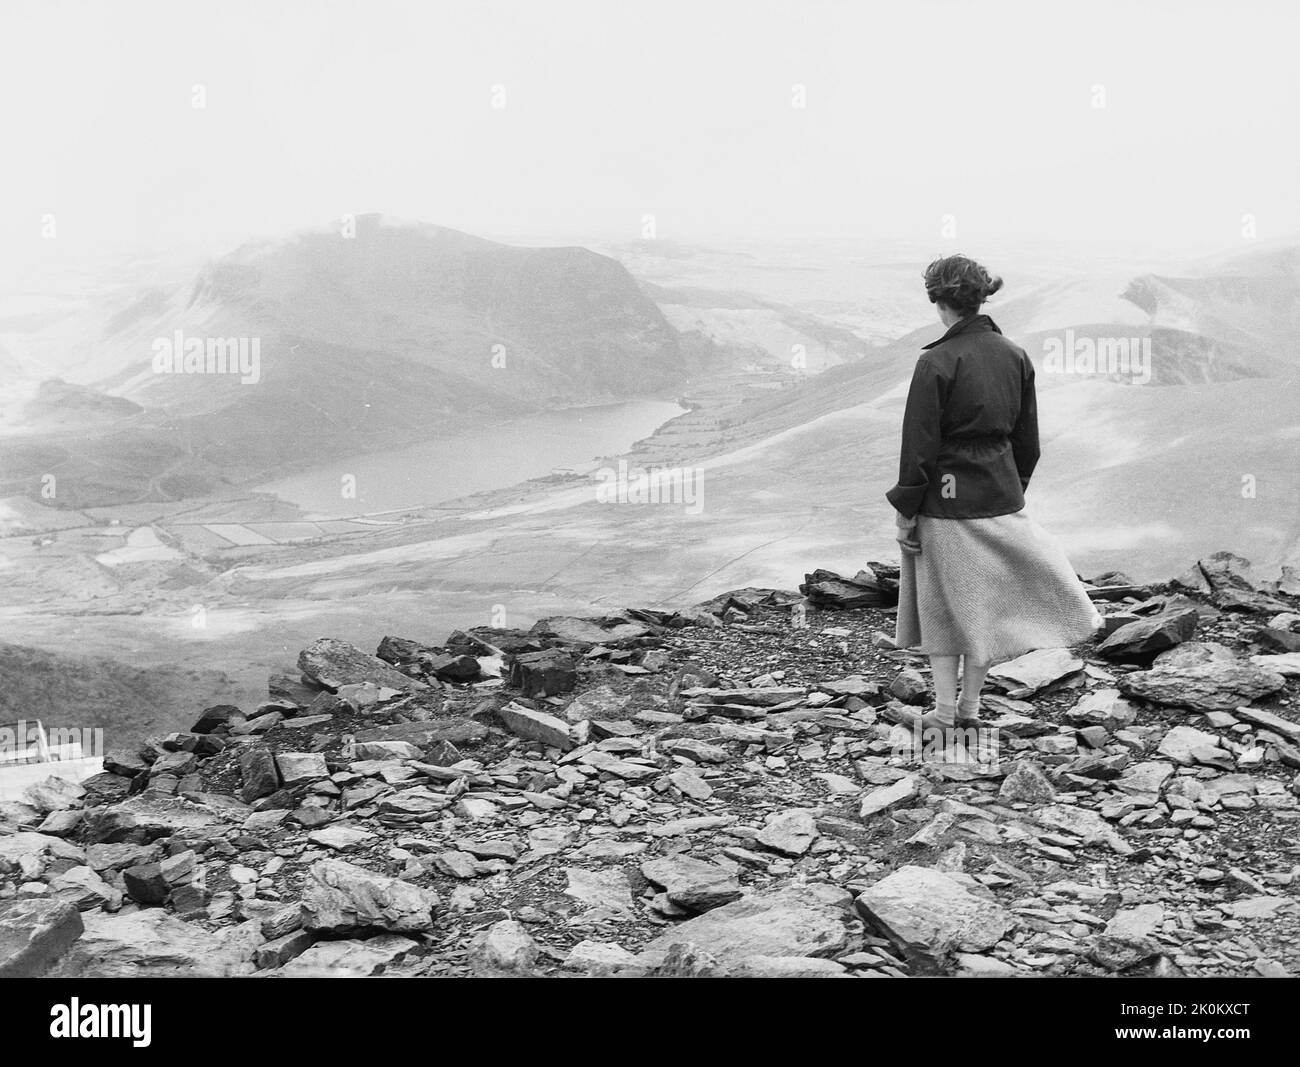 1956, historical, a lday standing in jacket and woolen skirt on rocks and slates on a high level ridge in the Snowdonia mountains, Wales, UK looking over the valley below.s Stock Photo